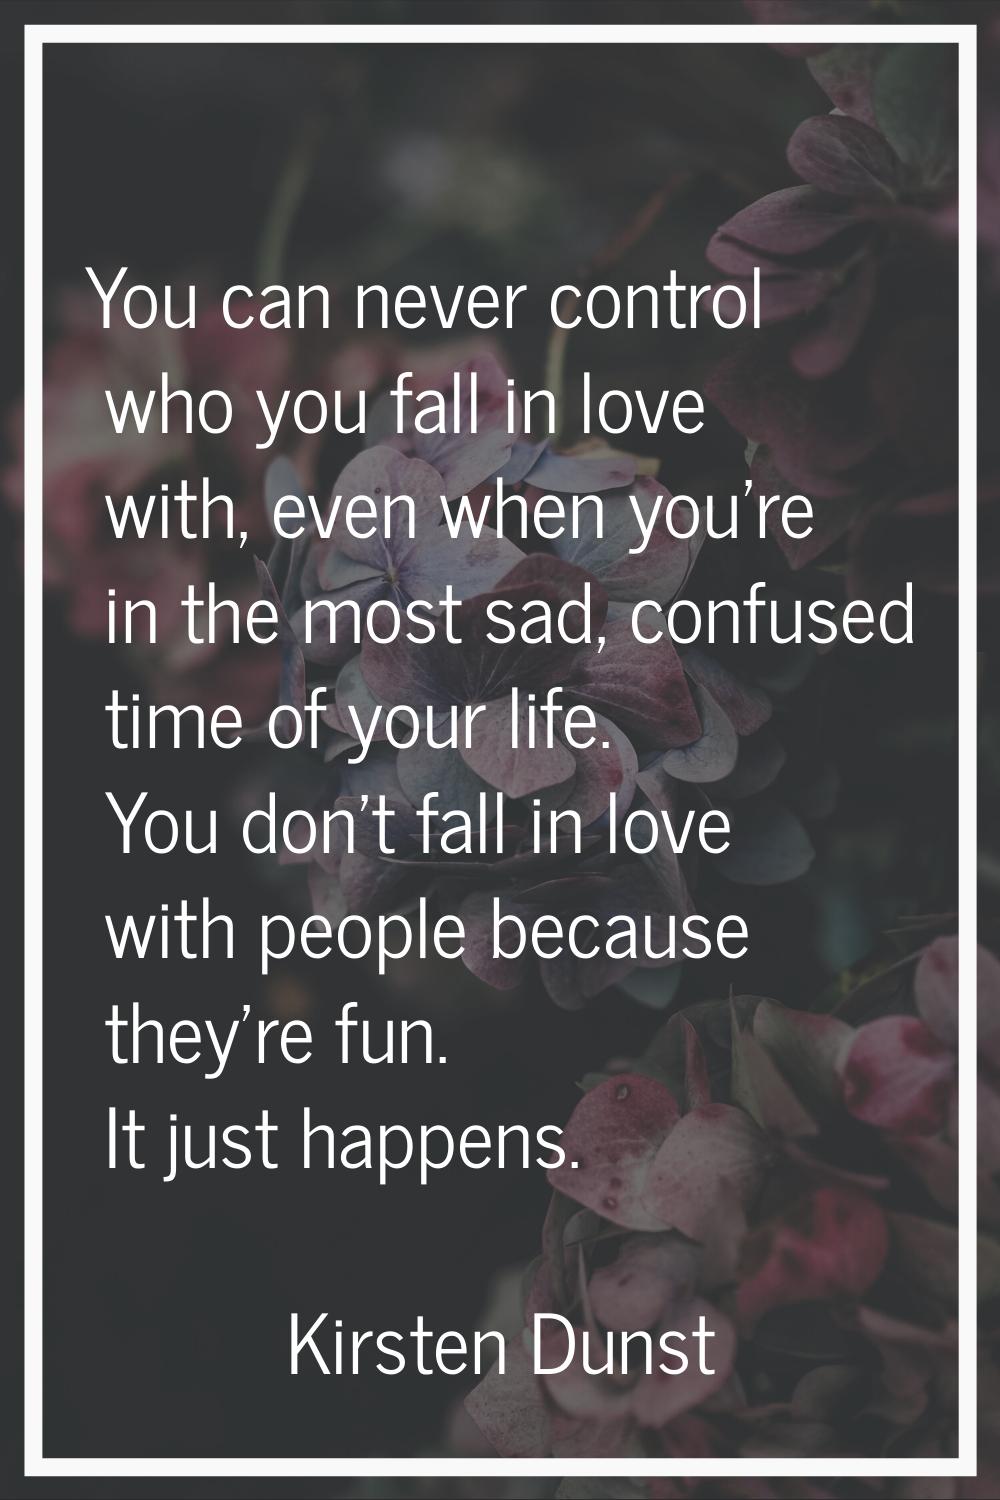 You can never control who you fall in love with, even when you're in the most sad, confused time of